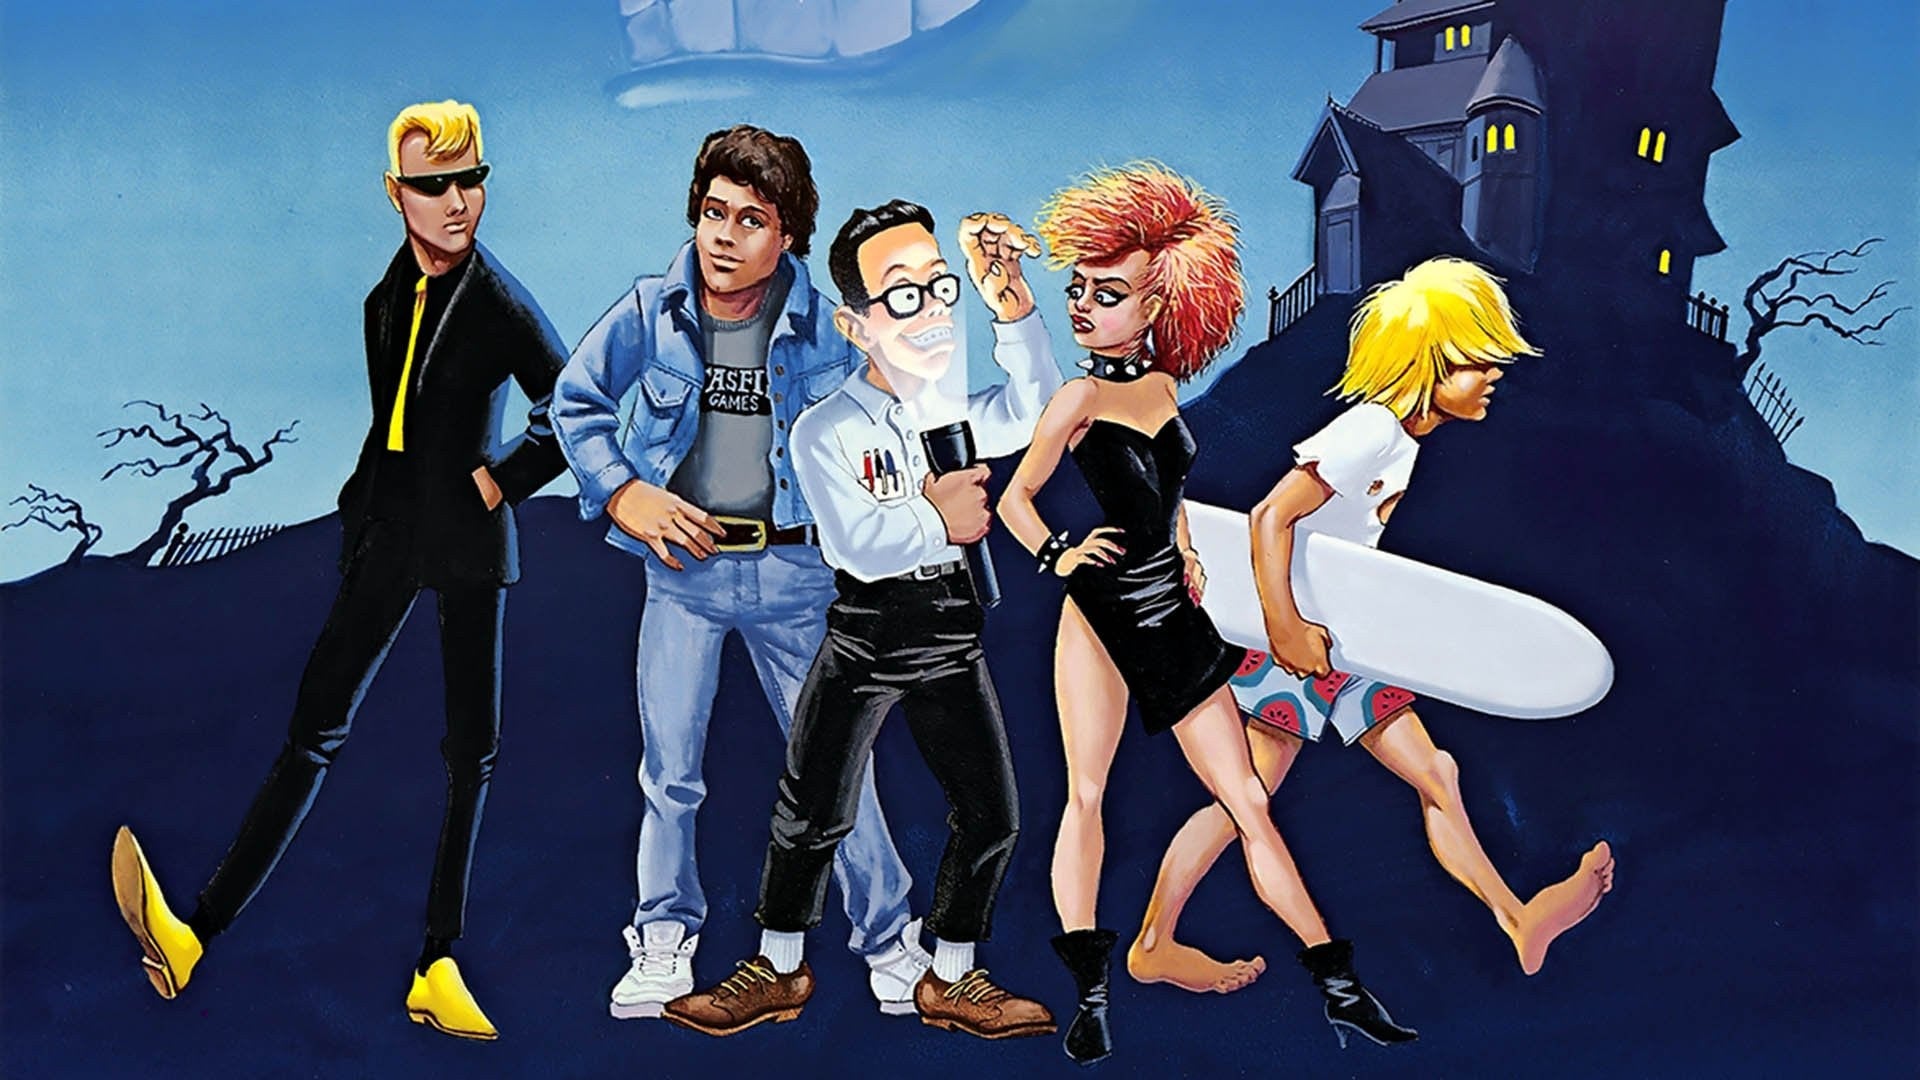 Image for Fans think Lucasfilm Games is teasing a Maniac Mansion return